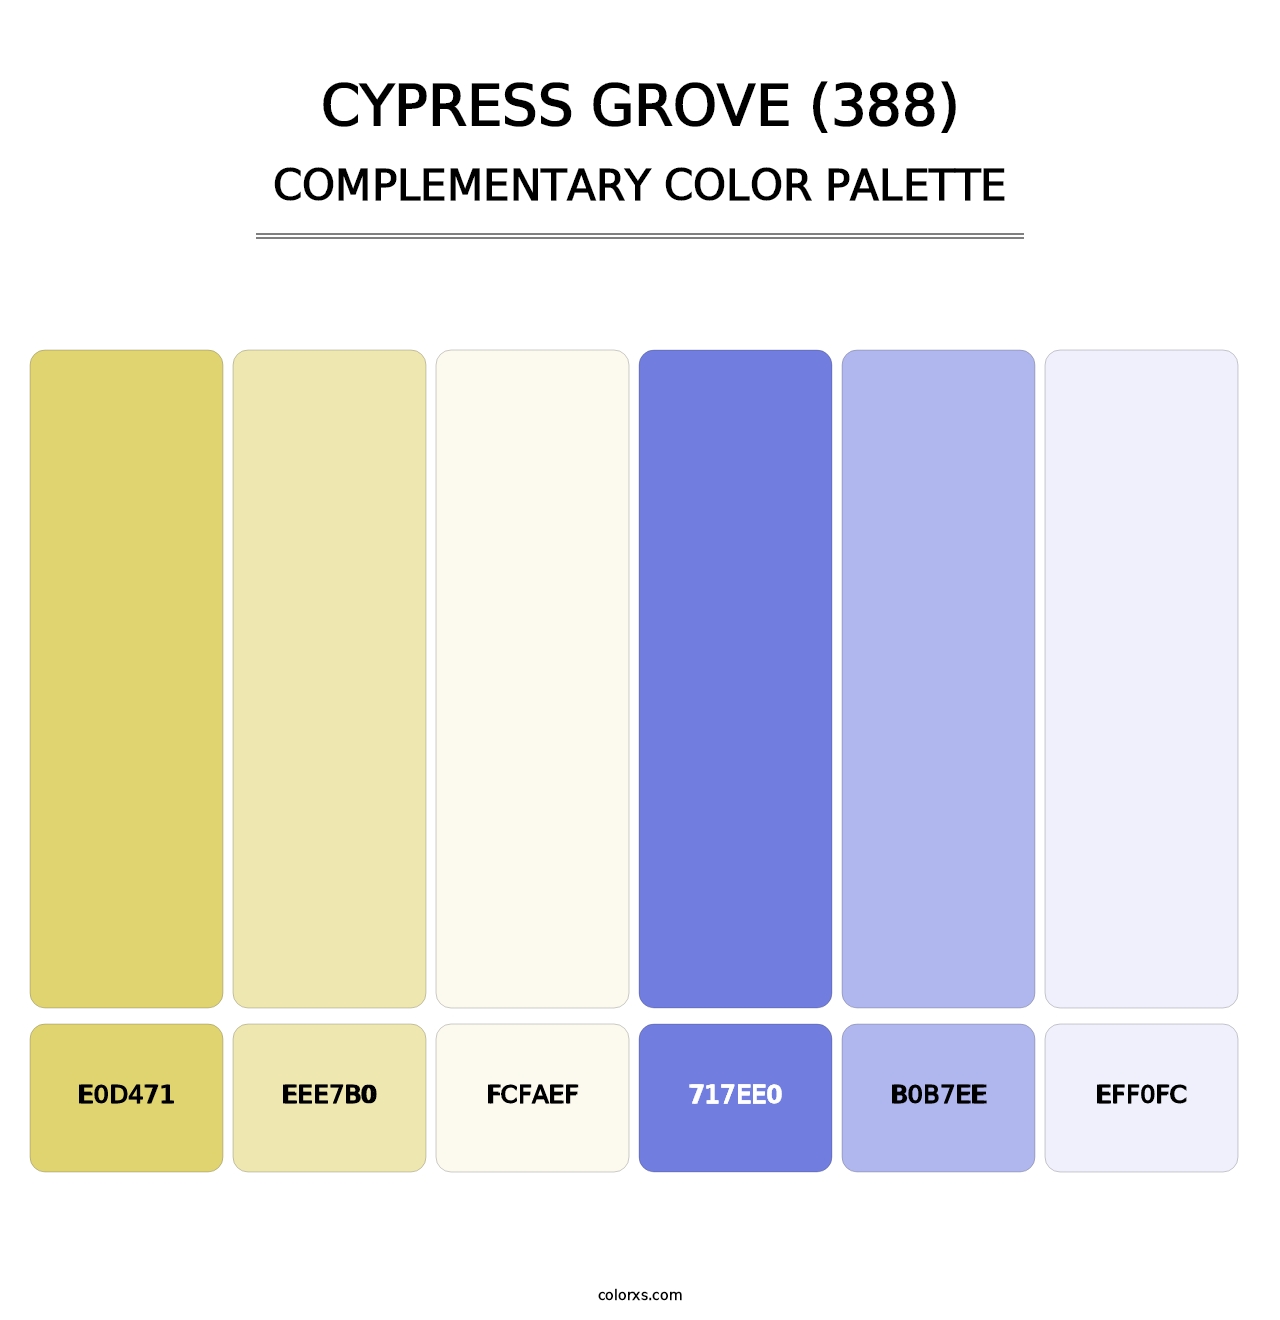 Cypress Grove (388) - Complementary Color Palette